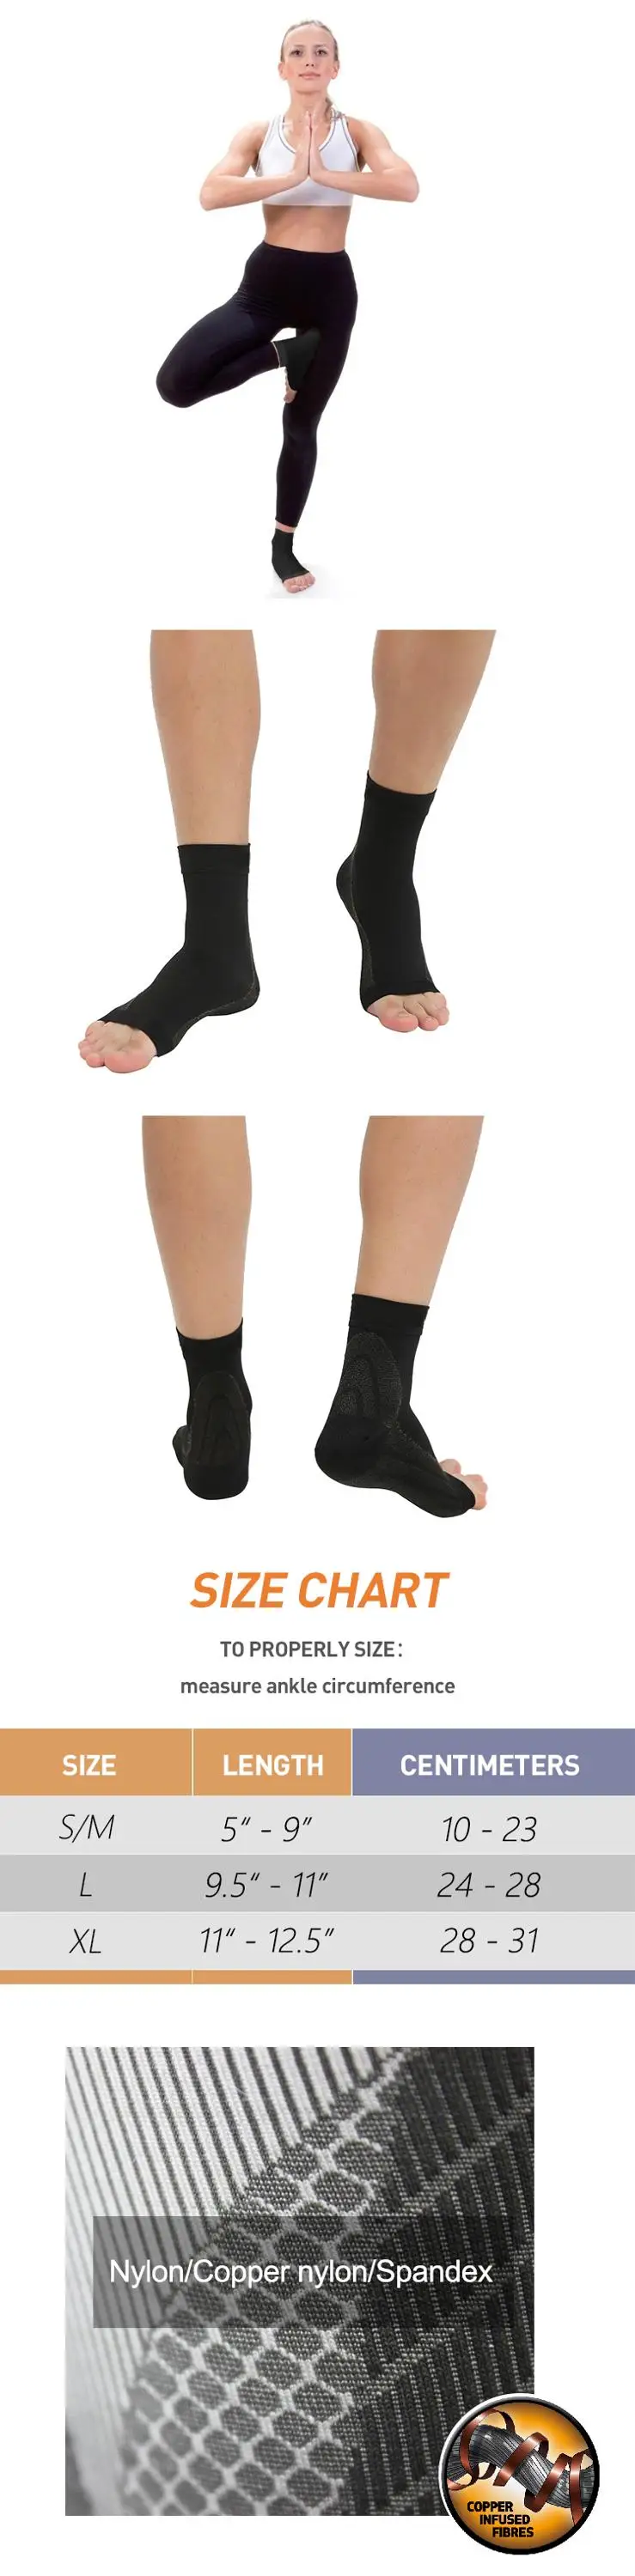 New style high quality Ankle Brace Compression Foot Sleeve Ankle support